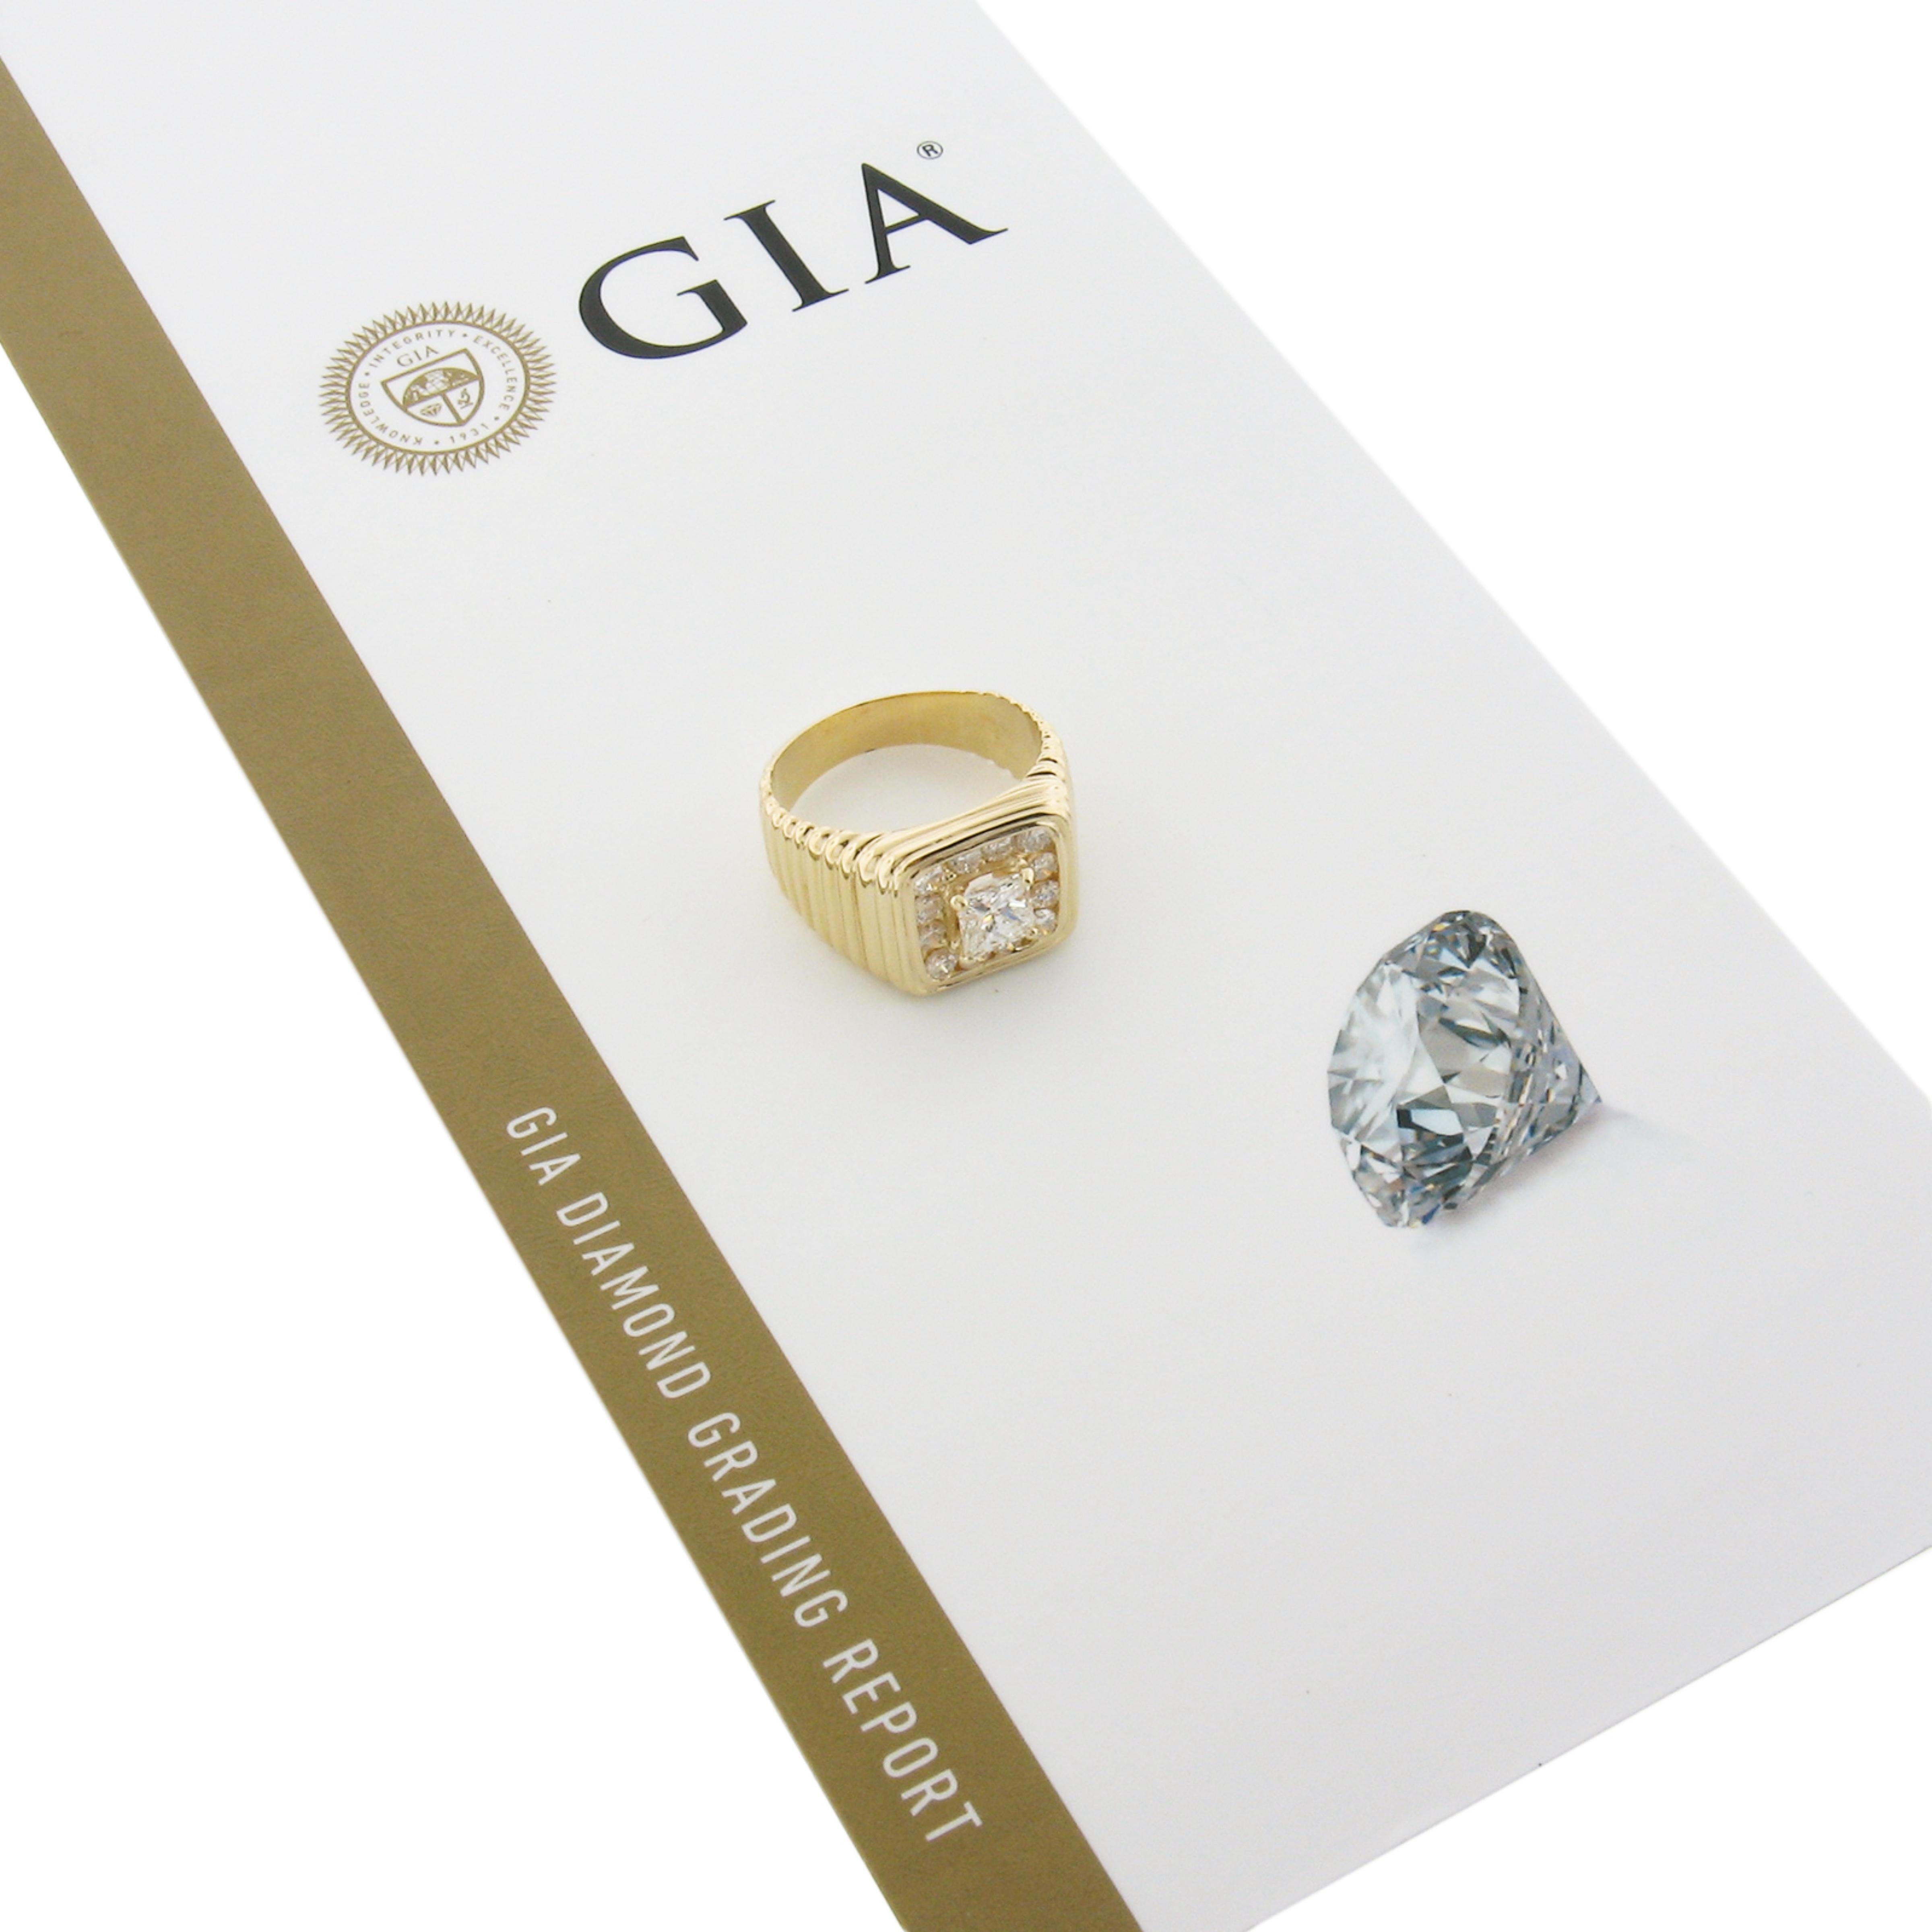 This bold men's ring is crafted in solid 14k yellow gold featuring a ribbed & grooved design and is set with a fine quality, GIA certified fiery princess cut diamond. The solitaire stone is adorned with a halo of 12 round brilliant cut channel set